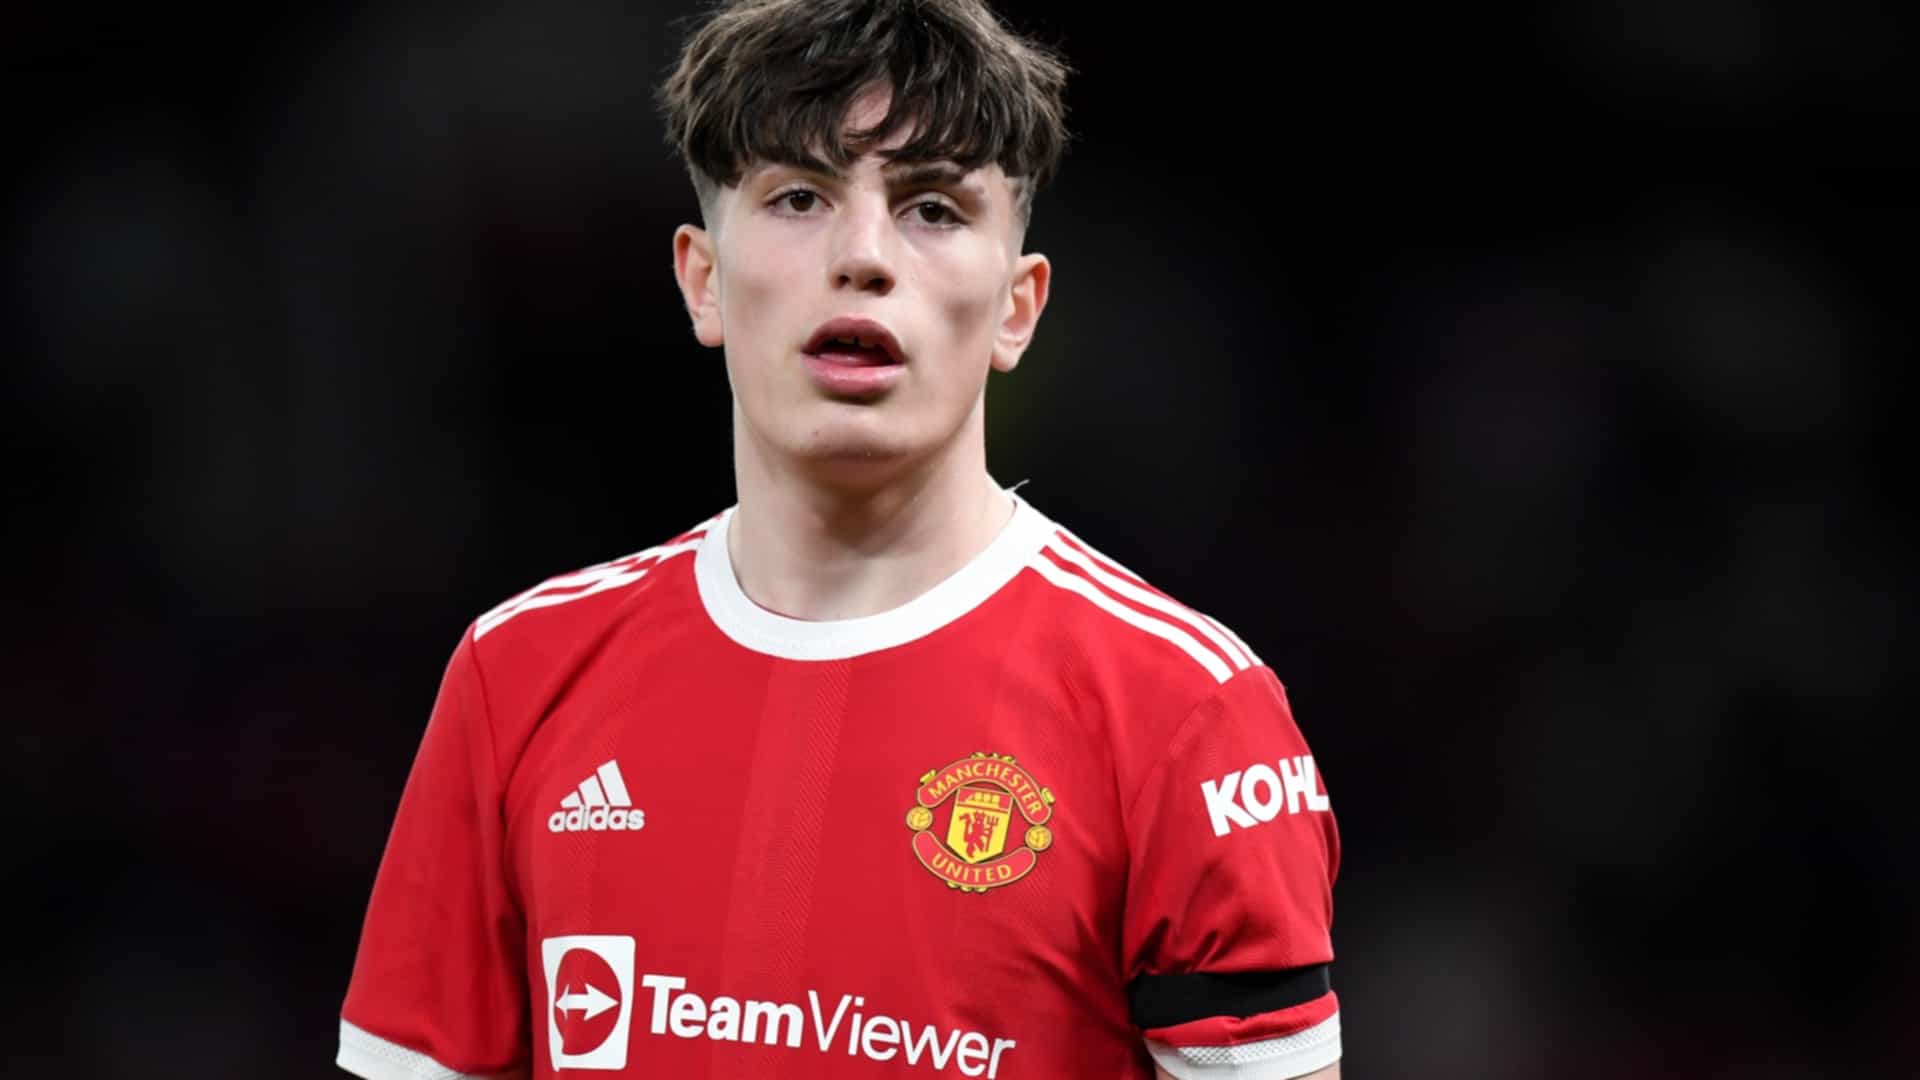 The 17-year-old Manchester United youngster who is teammates with Cristiano Ronaldo and Lionel Messi and made Red Devils debut against Chelsea